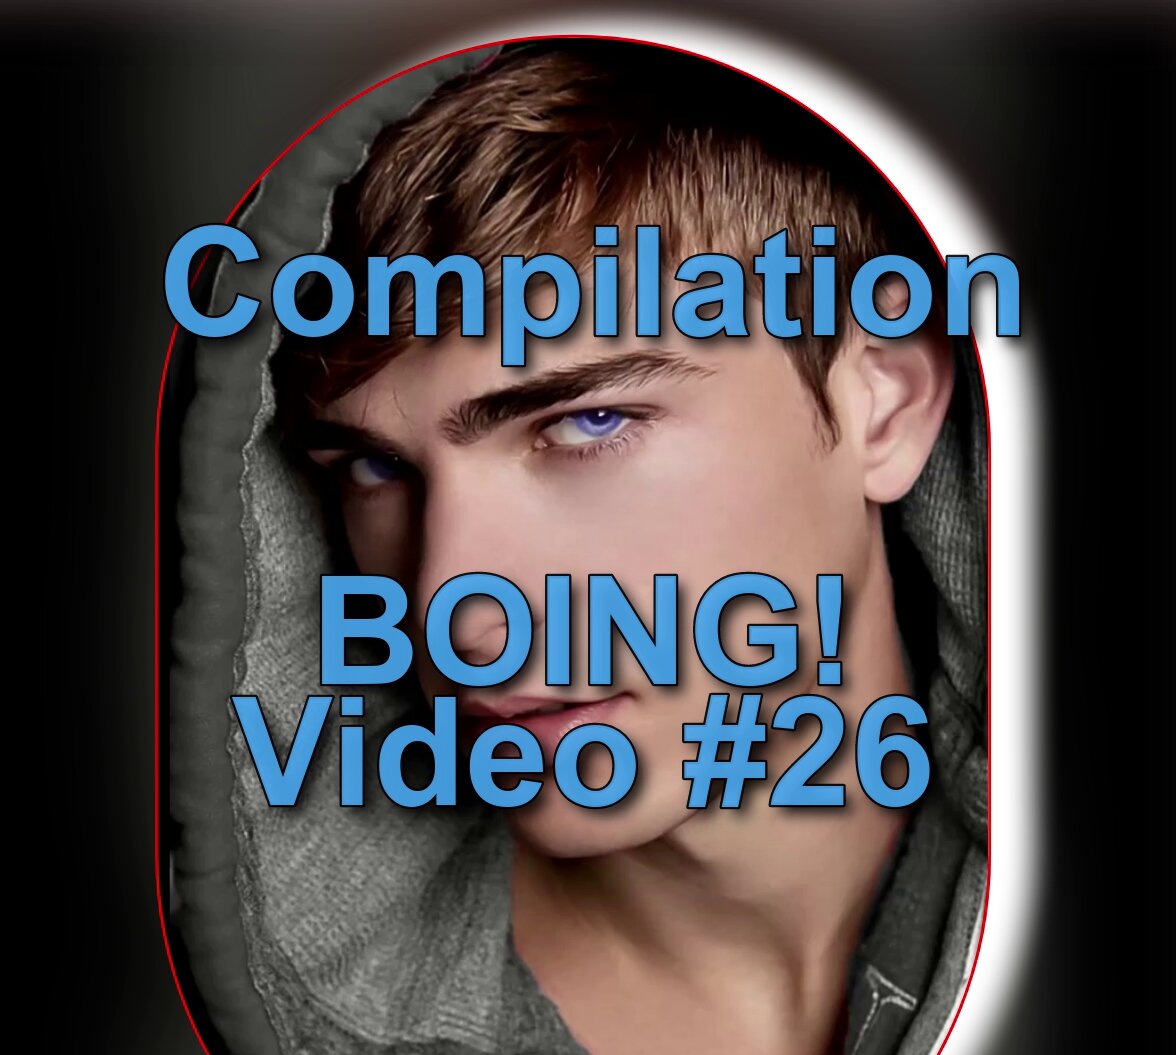 Boing Video #26